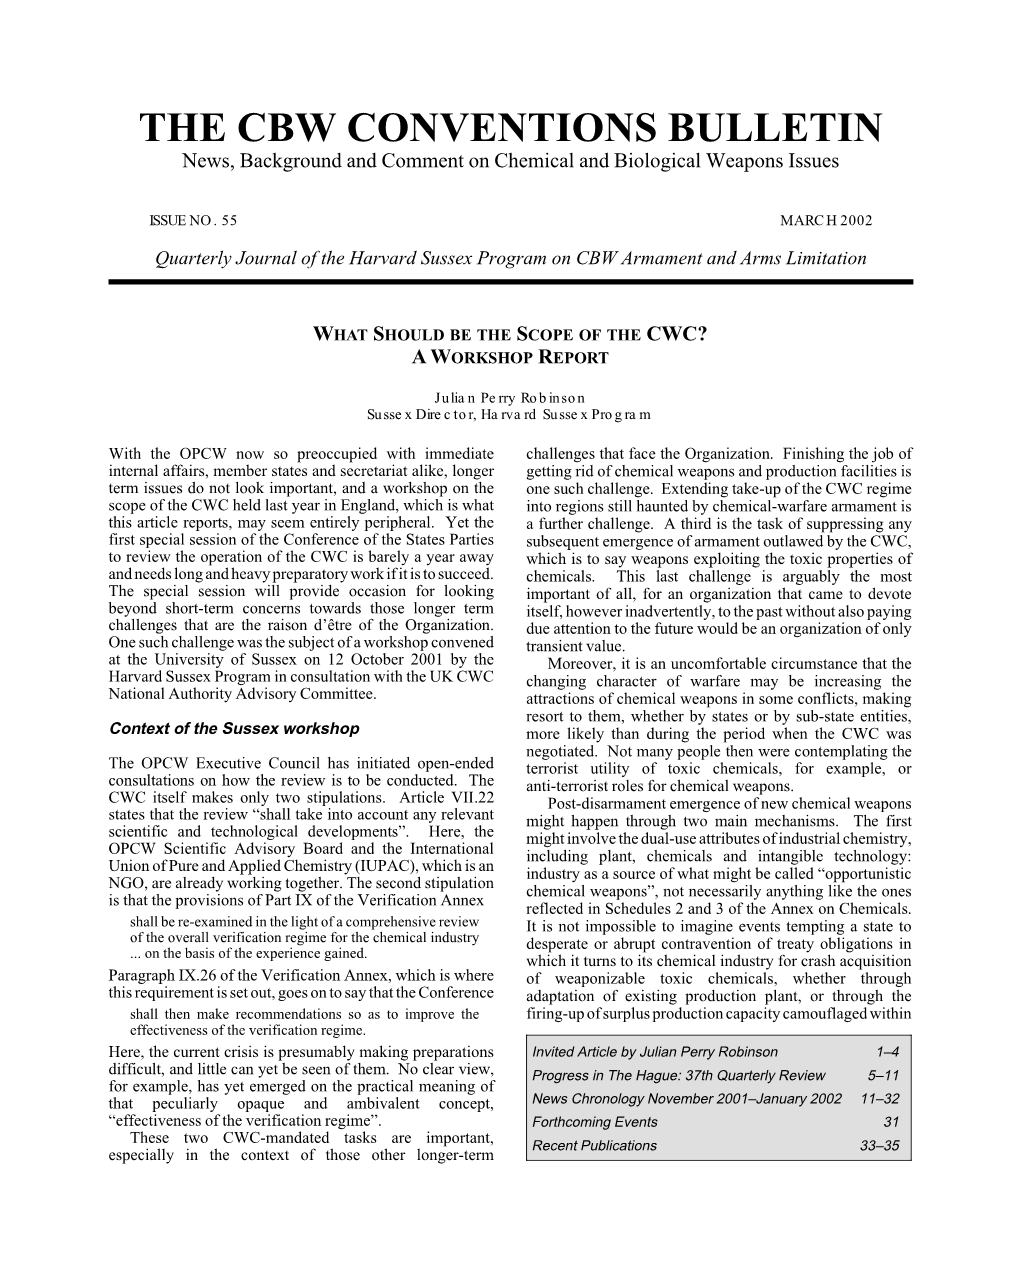 THE CBW CONVENTIONS BULLETIN News, Background and Comment on Chemical and Biological Weapons Issues